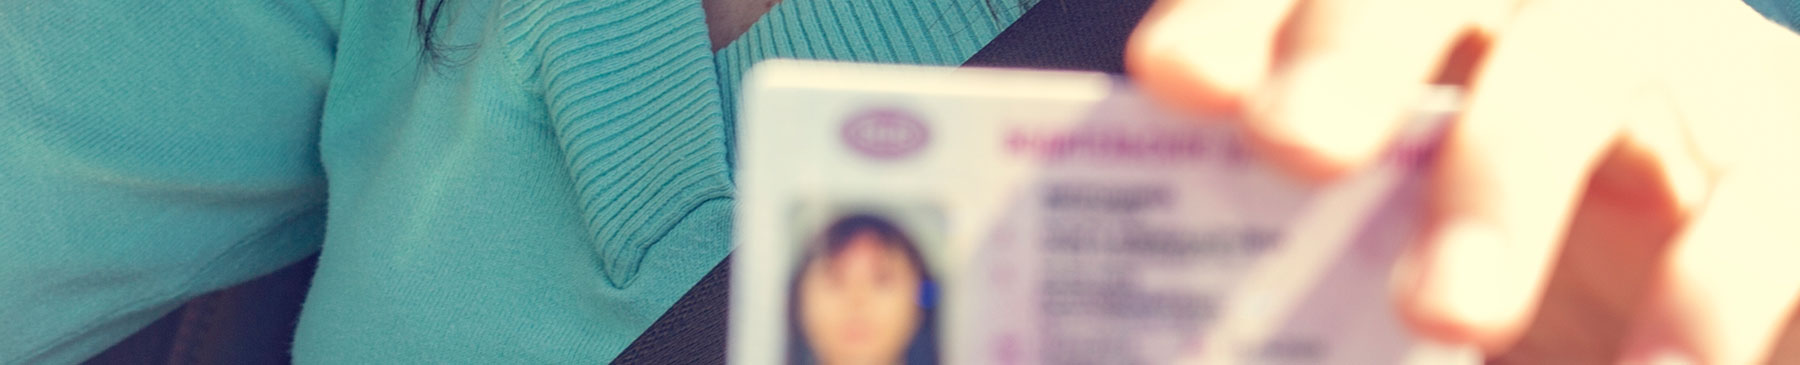 close up of drivers license